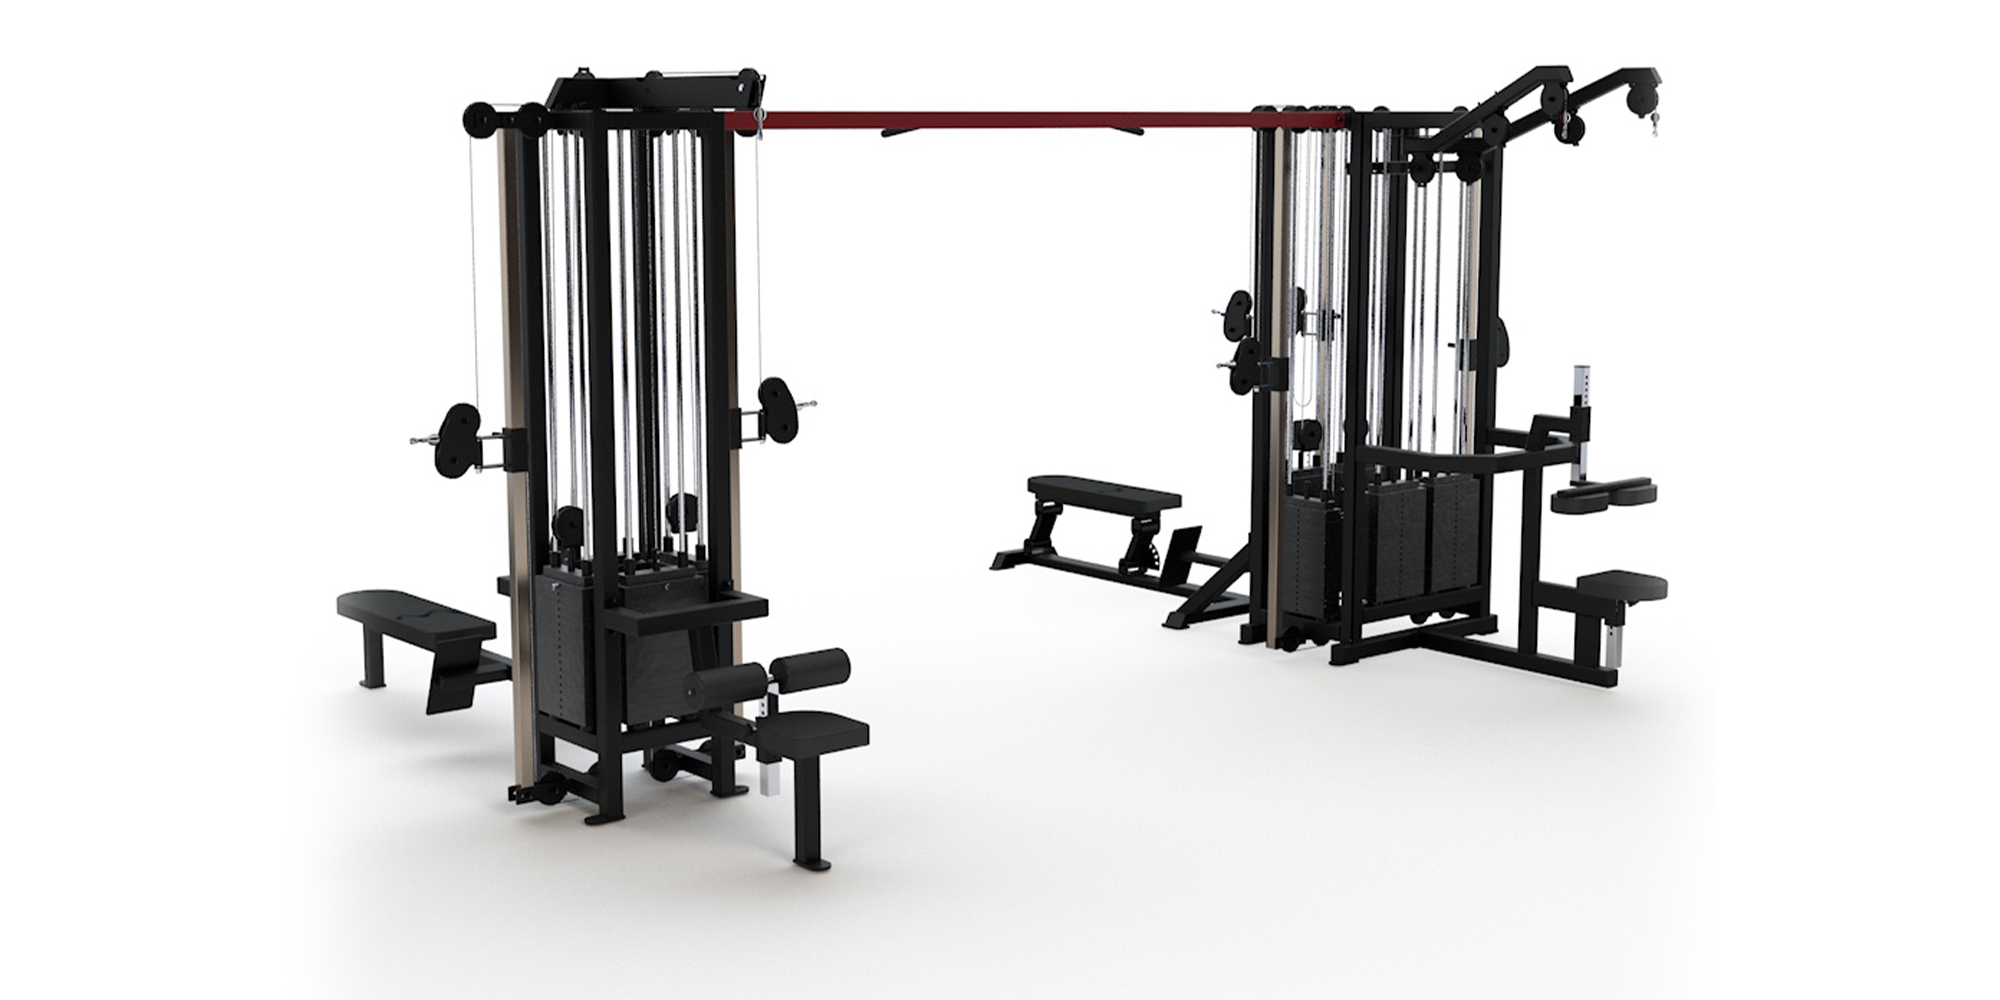 Detail Images Of Gym Equipment Nomer 35